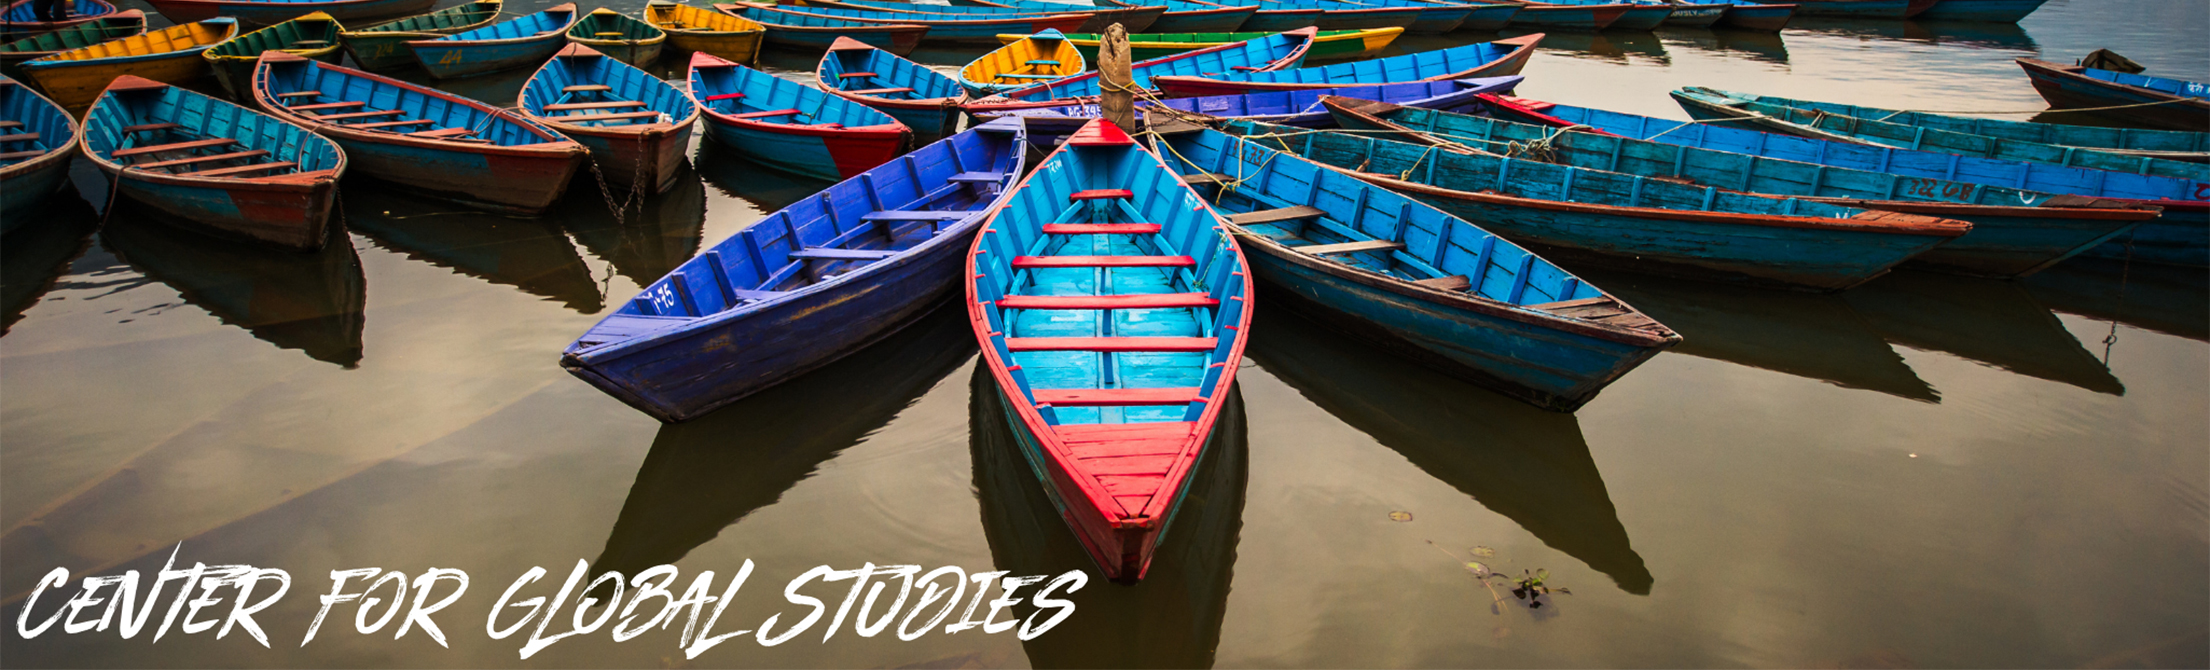 A line of blue and other multicolored boats sitting in water, with a caption that reads "Center for Global Studies."